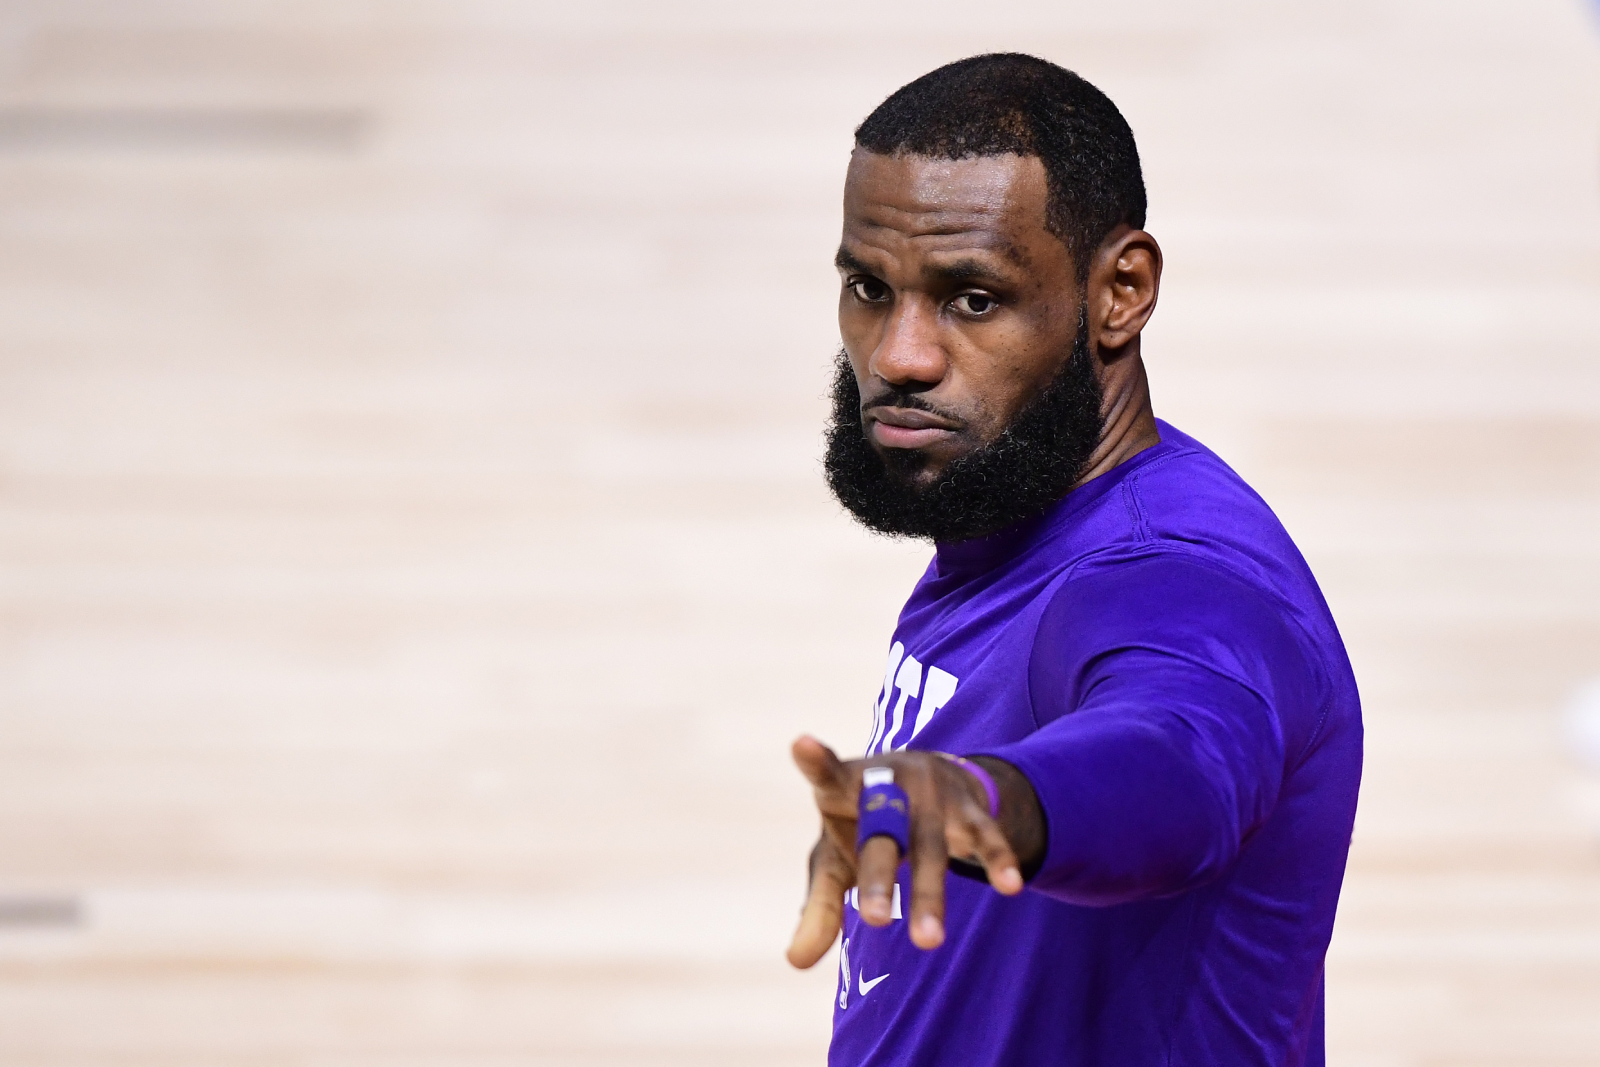 LeBron James is having success on his third different NBA team. However, does he plan to stay on the LA Lakers or switch teams again?